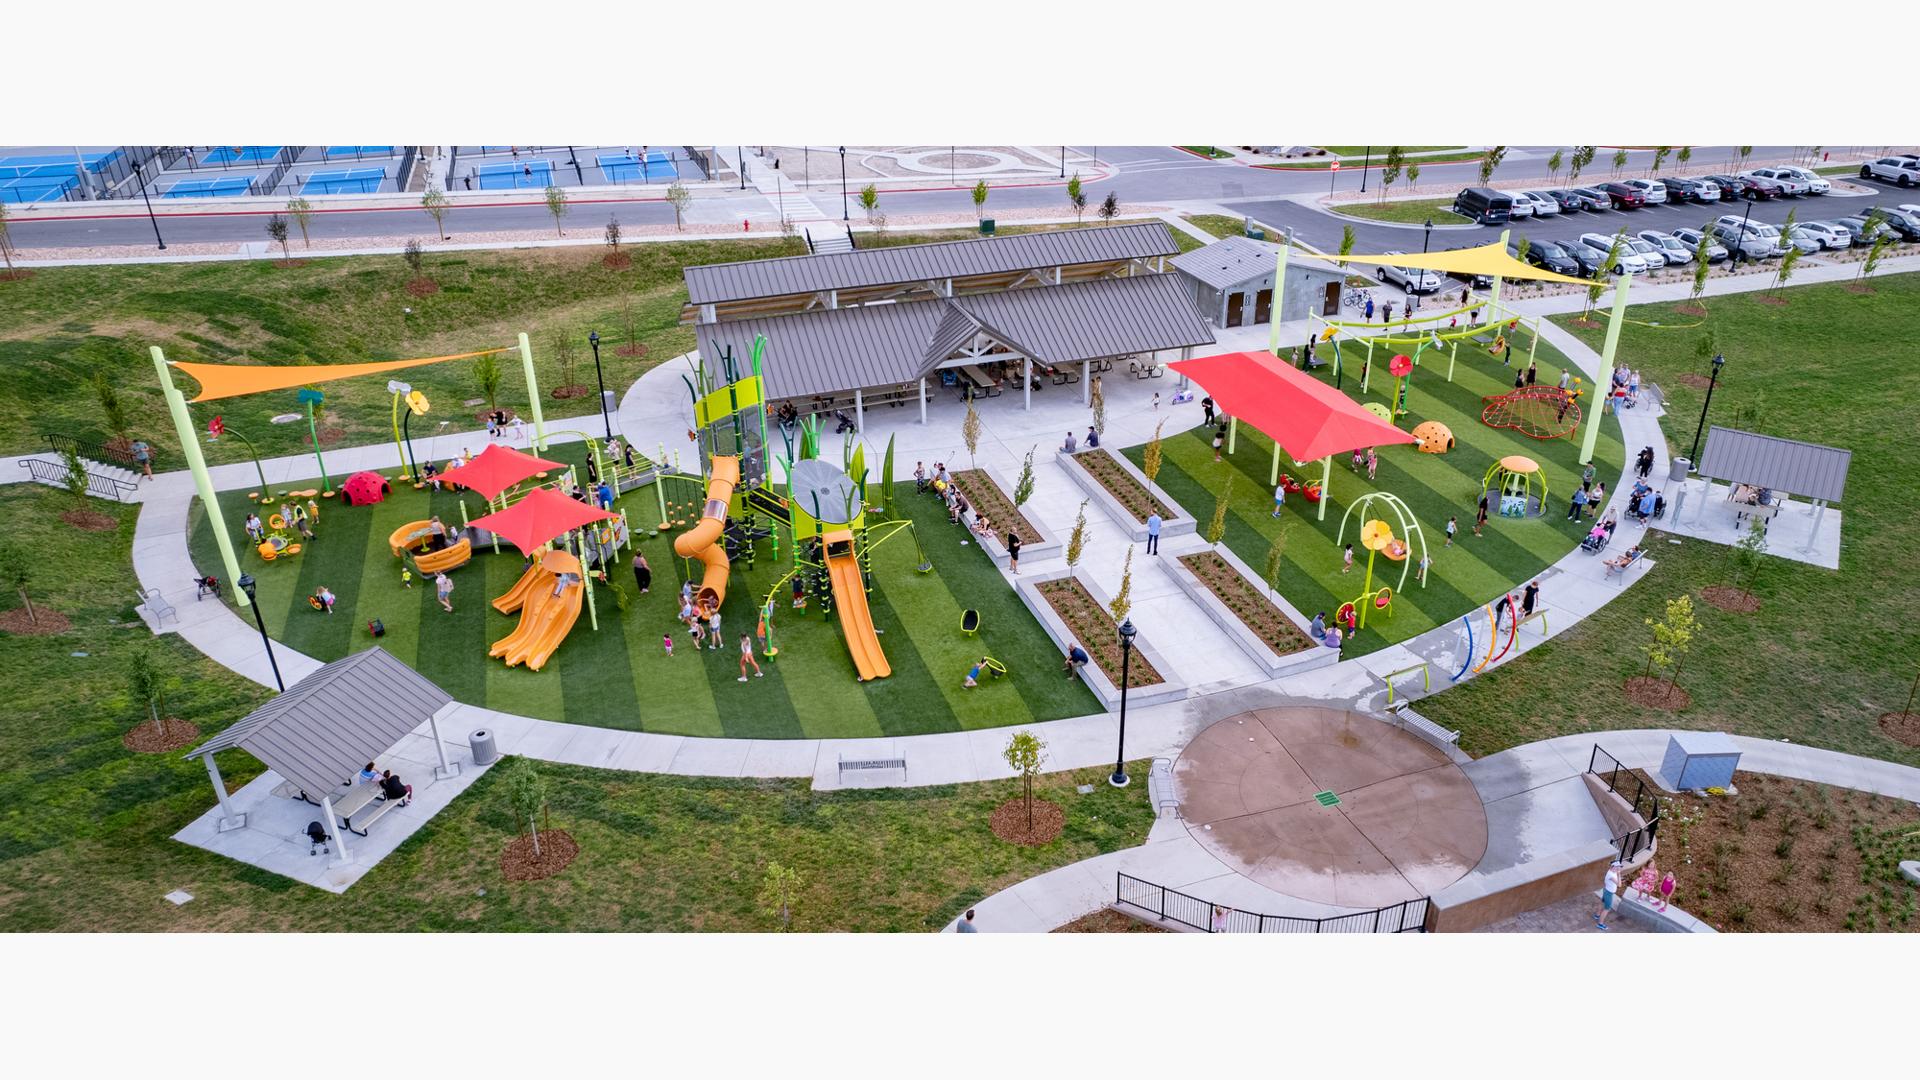 Elevated view of a large half moon shaped play area filled with play structures, swings, and climbers.